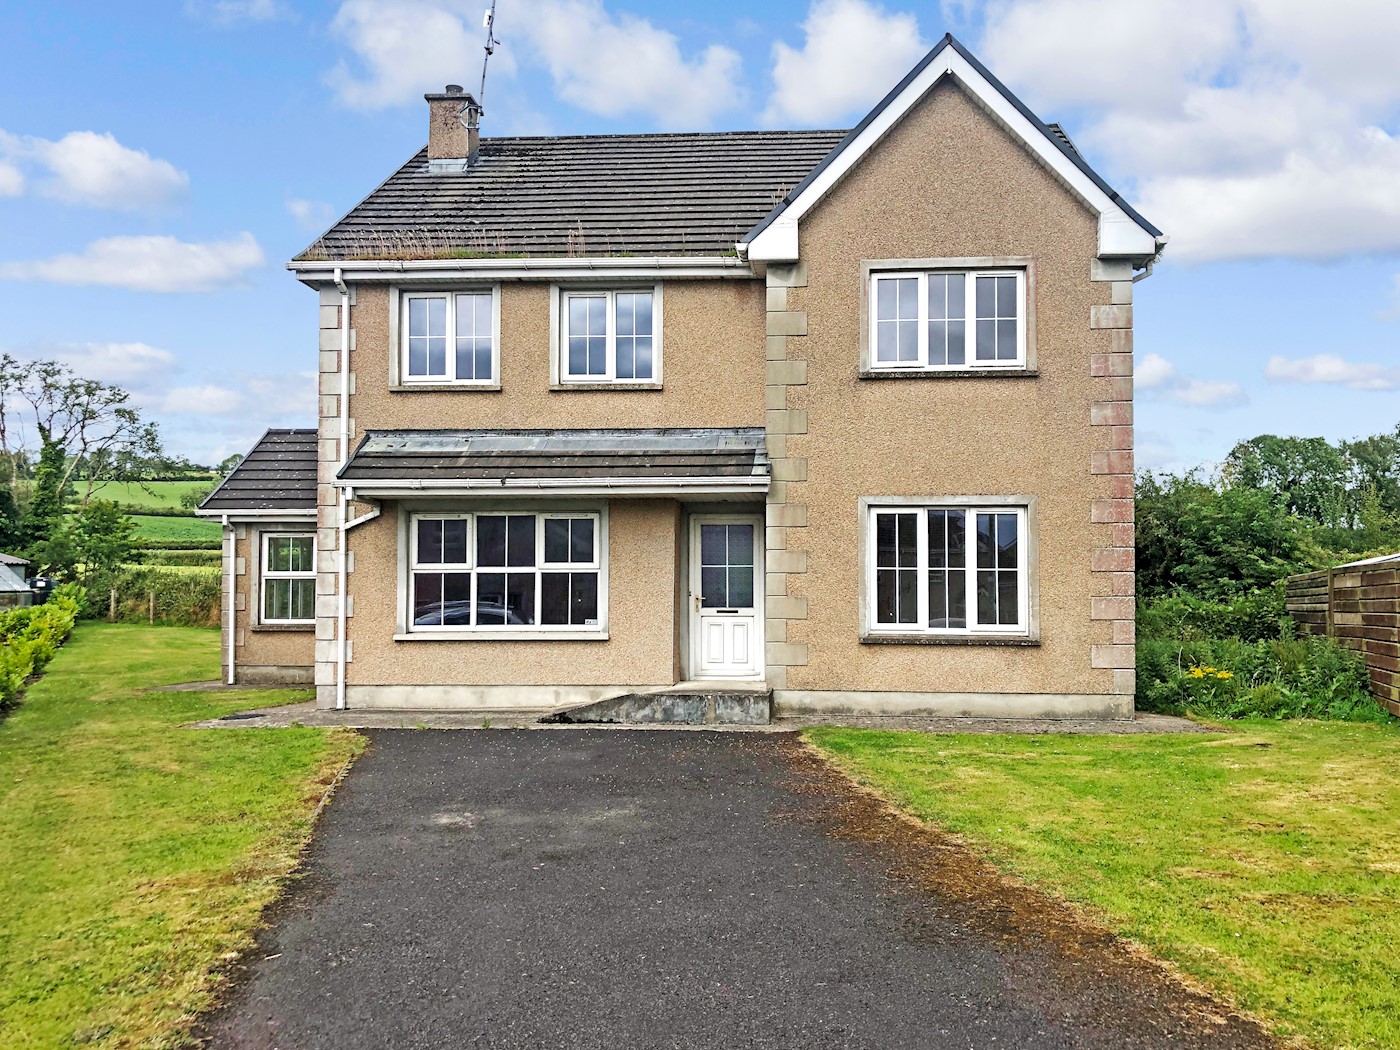 29 Beechwood Park, Convoy, Co. Donegal, F93 HX86 1/17